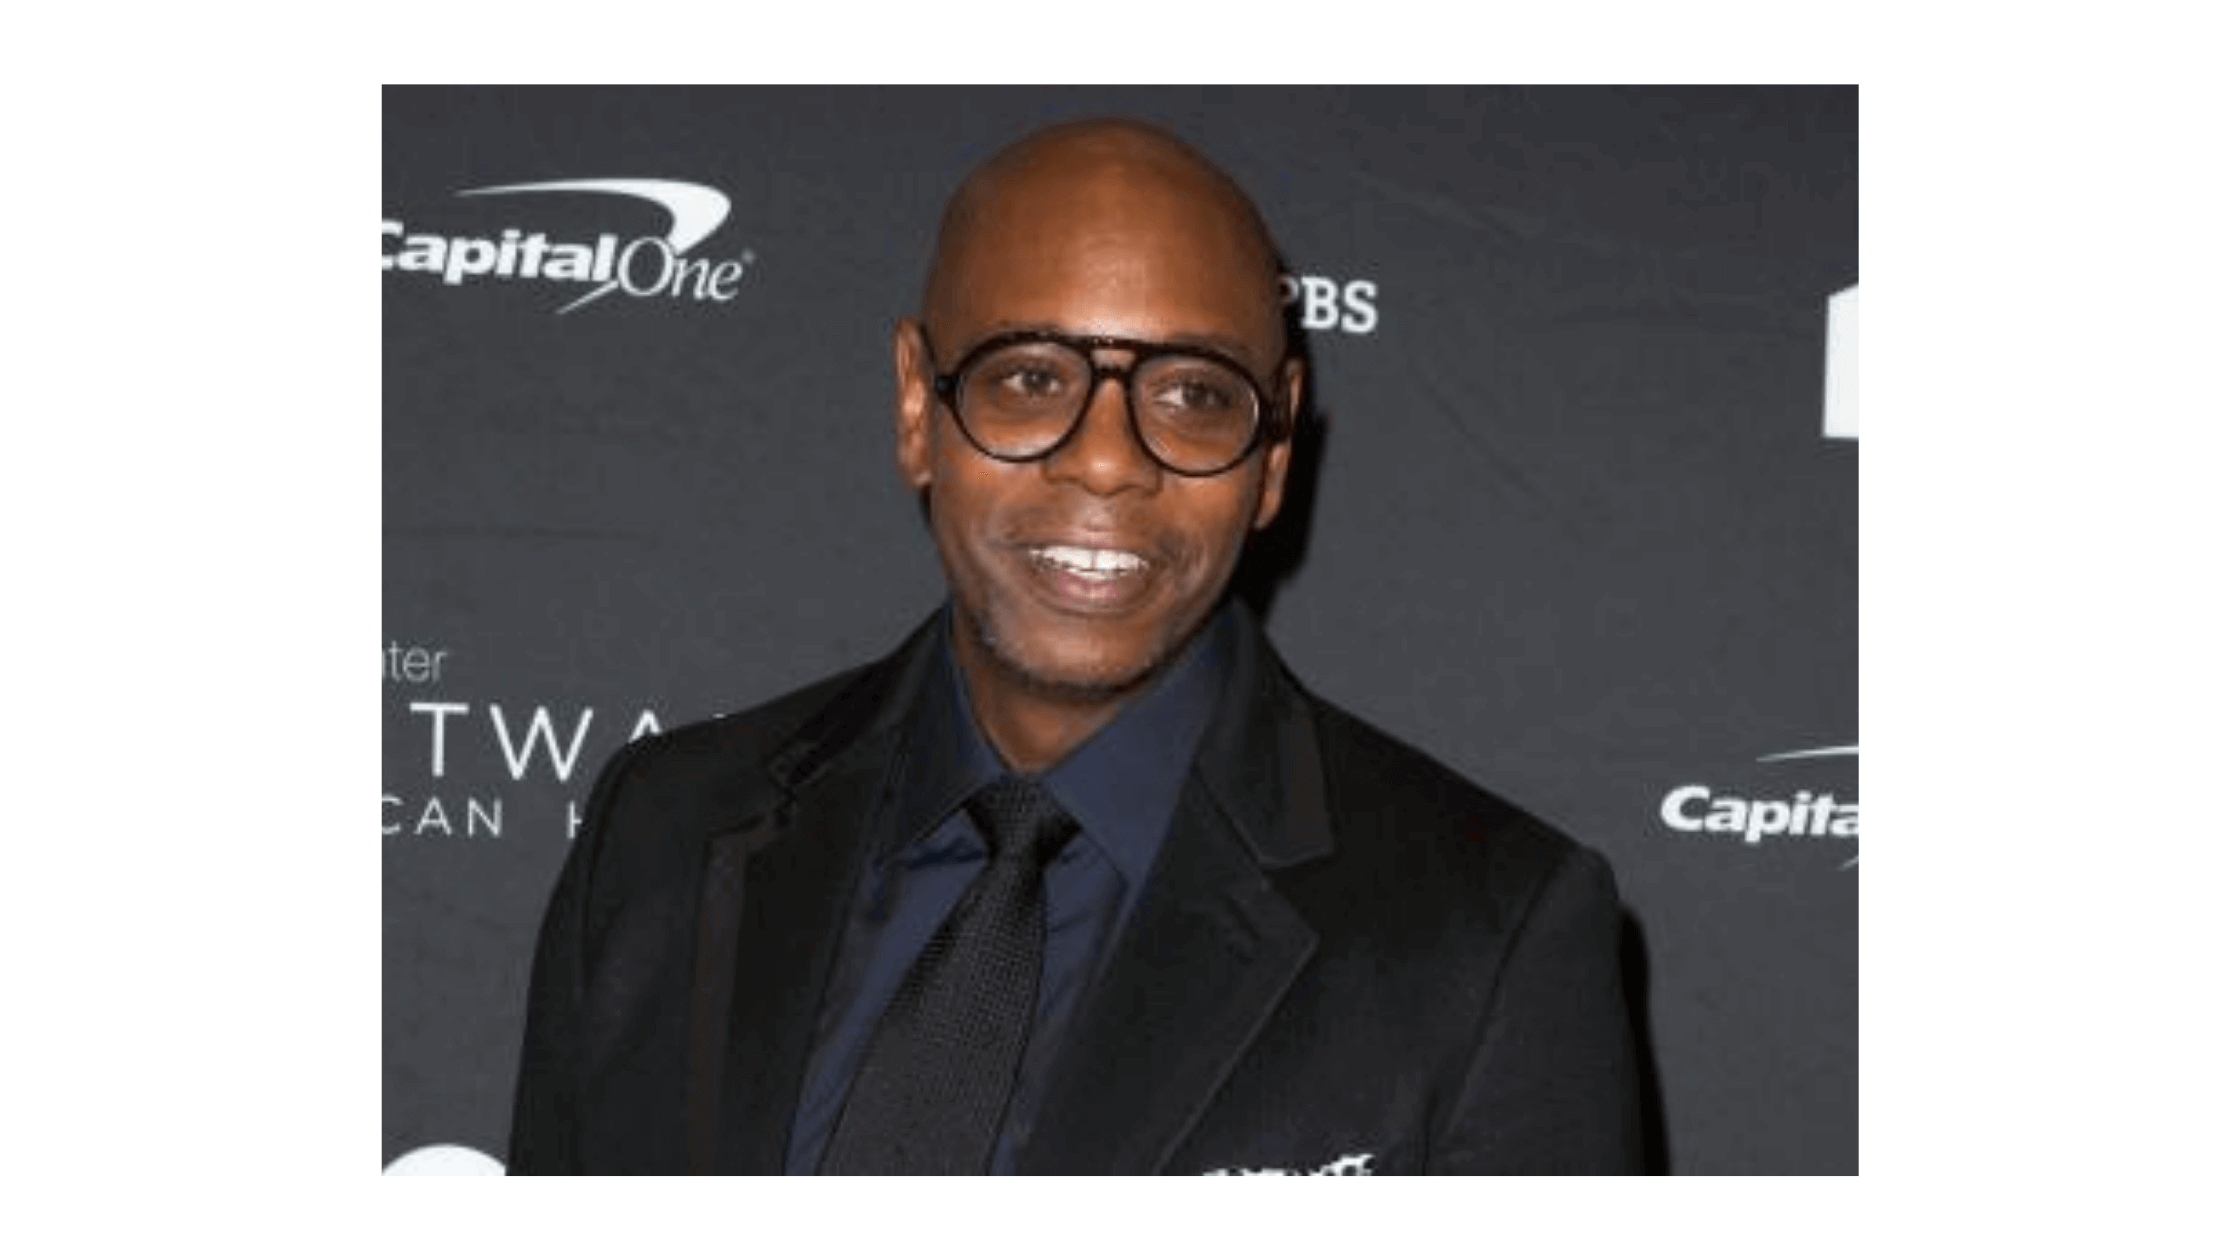 Who Is Dave Chappelle Attack On The Hollywood Bowl, Both Dave Chappelle And Netflix Have Issued Statements!